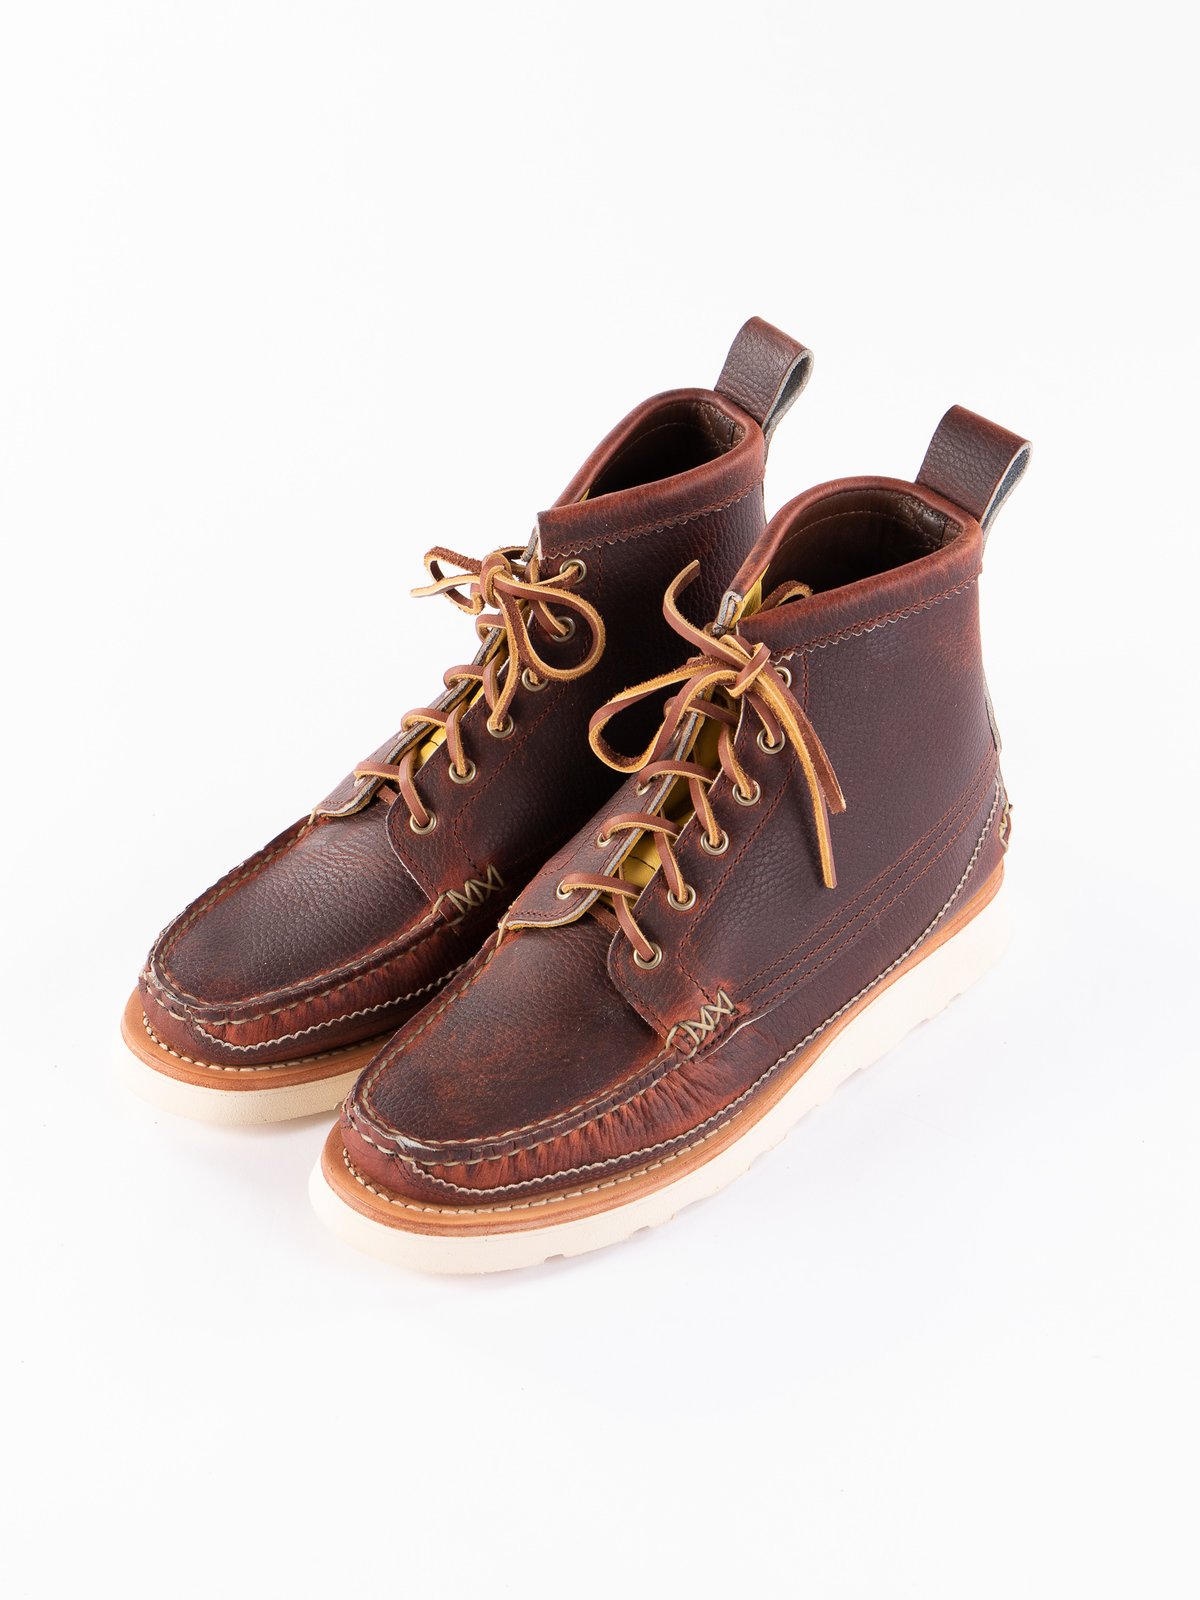 CP Brown Maine Guide 6 Eye DB Boot Exclusive - Image 2